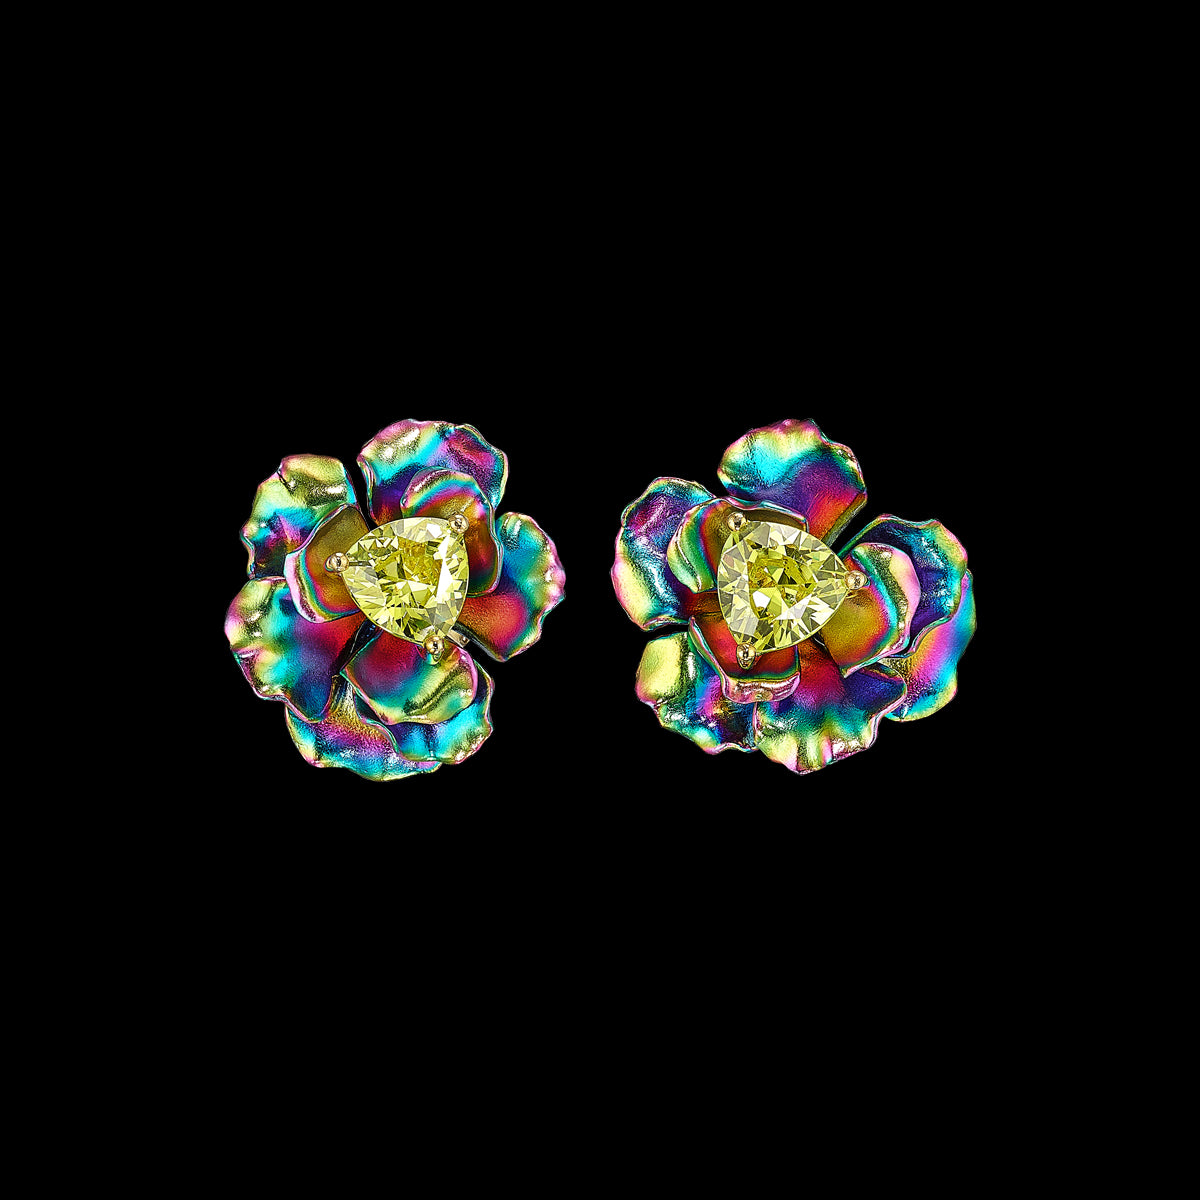 Rainbow Rose Studs, Earrings, Anabela Chan Joaillerie - Fine jewelry with laboratory grown and created gemstones hand-crafted in the United Kingdom. Anabela Chan Joaillerie is the first fine jewellery brand in the world to champion laboratory-grown and created gemstones with high jewellery design, artisanal craftsmanship and a focus on ethical and sustainable innovations.